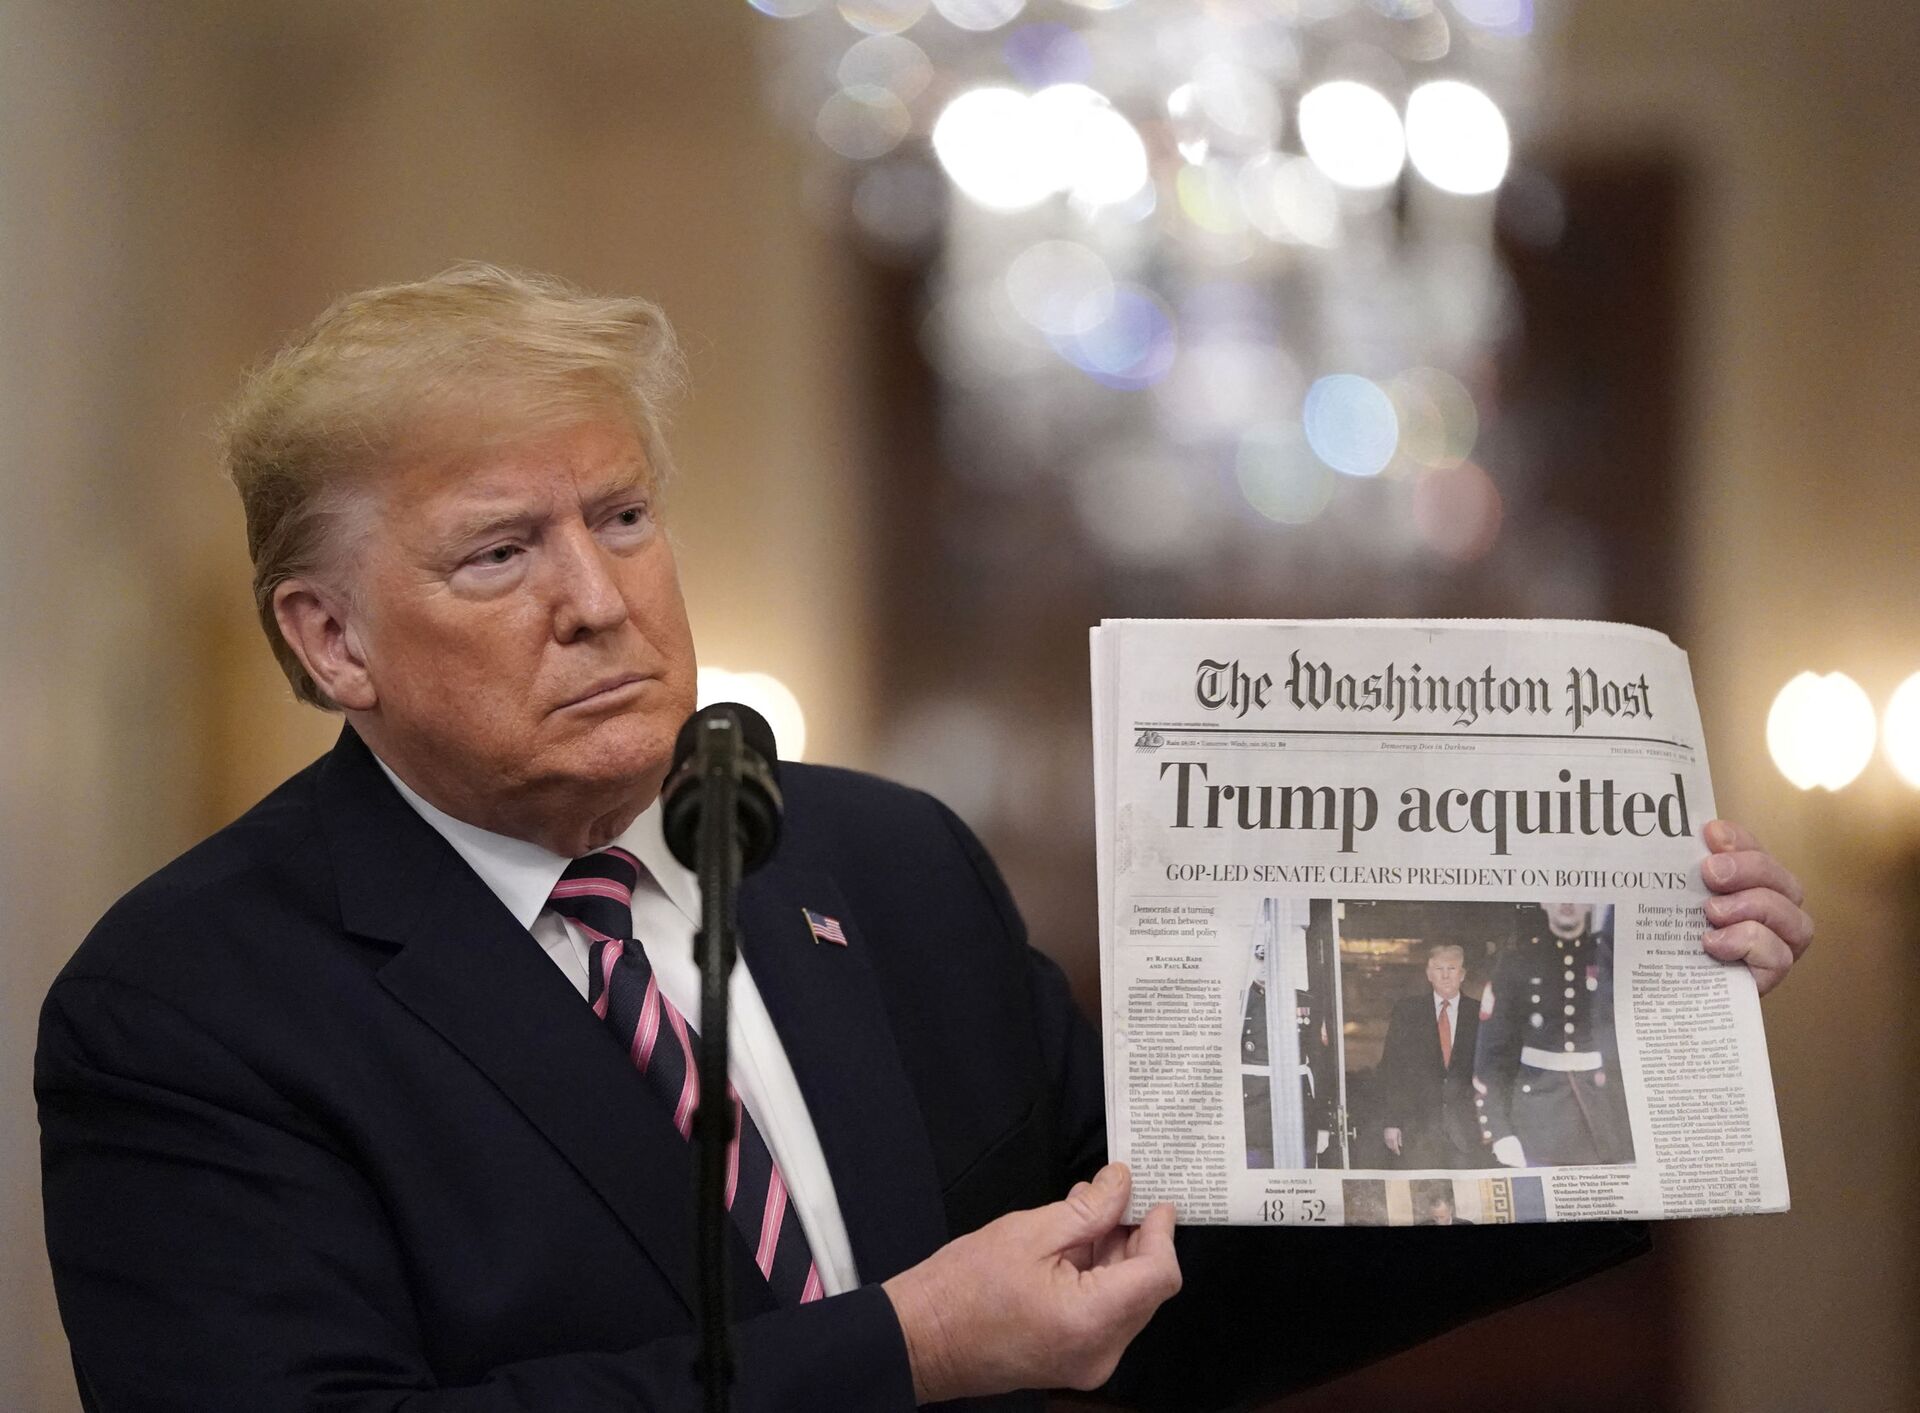 WASHINGTON, DC - FEBRUARY 06: U.S. President Donald Trump holds a copy of The Washington Post as he speaks in the East Room of the White House one day after the U.S. Senate acquitted on two articles of impeachment, ion February 6, 2020 in Washington, DC - Sputnik International, 1920, 29.09.2023